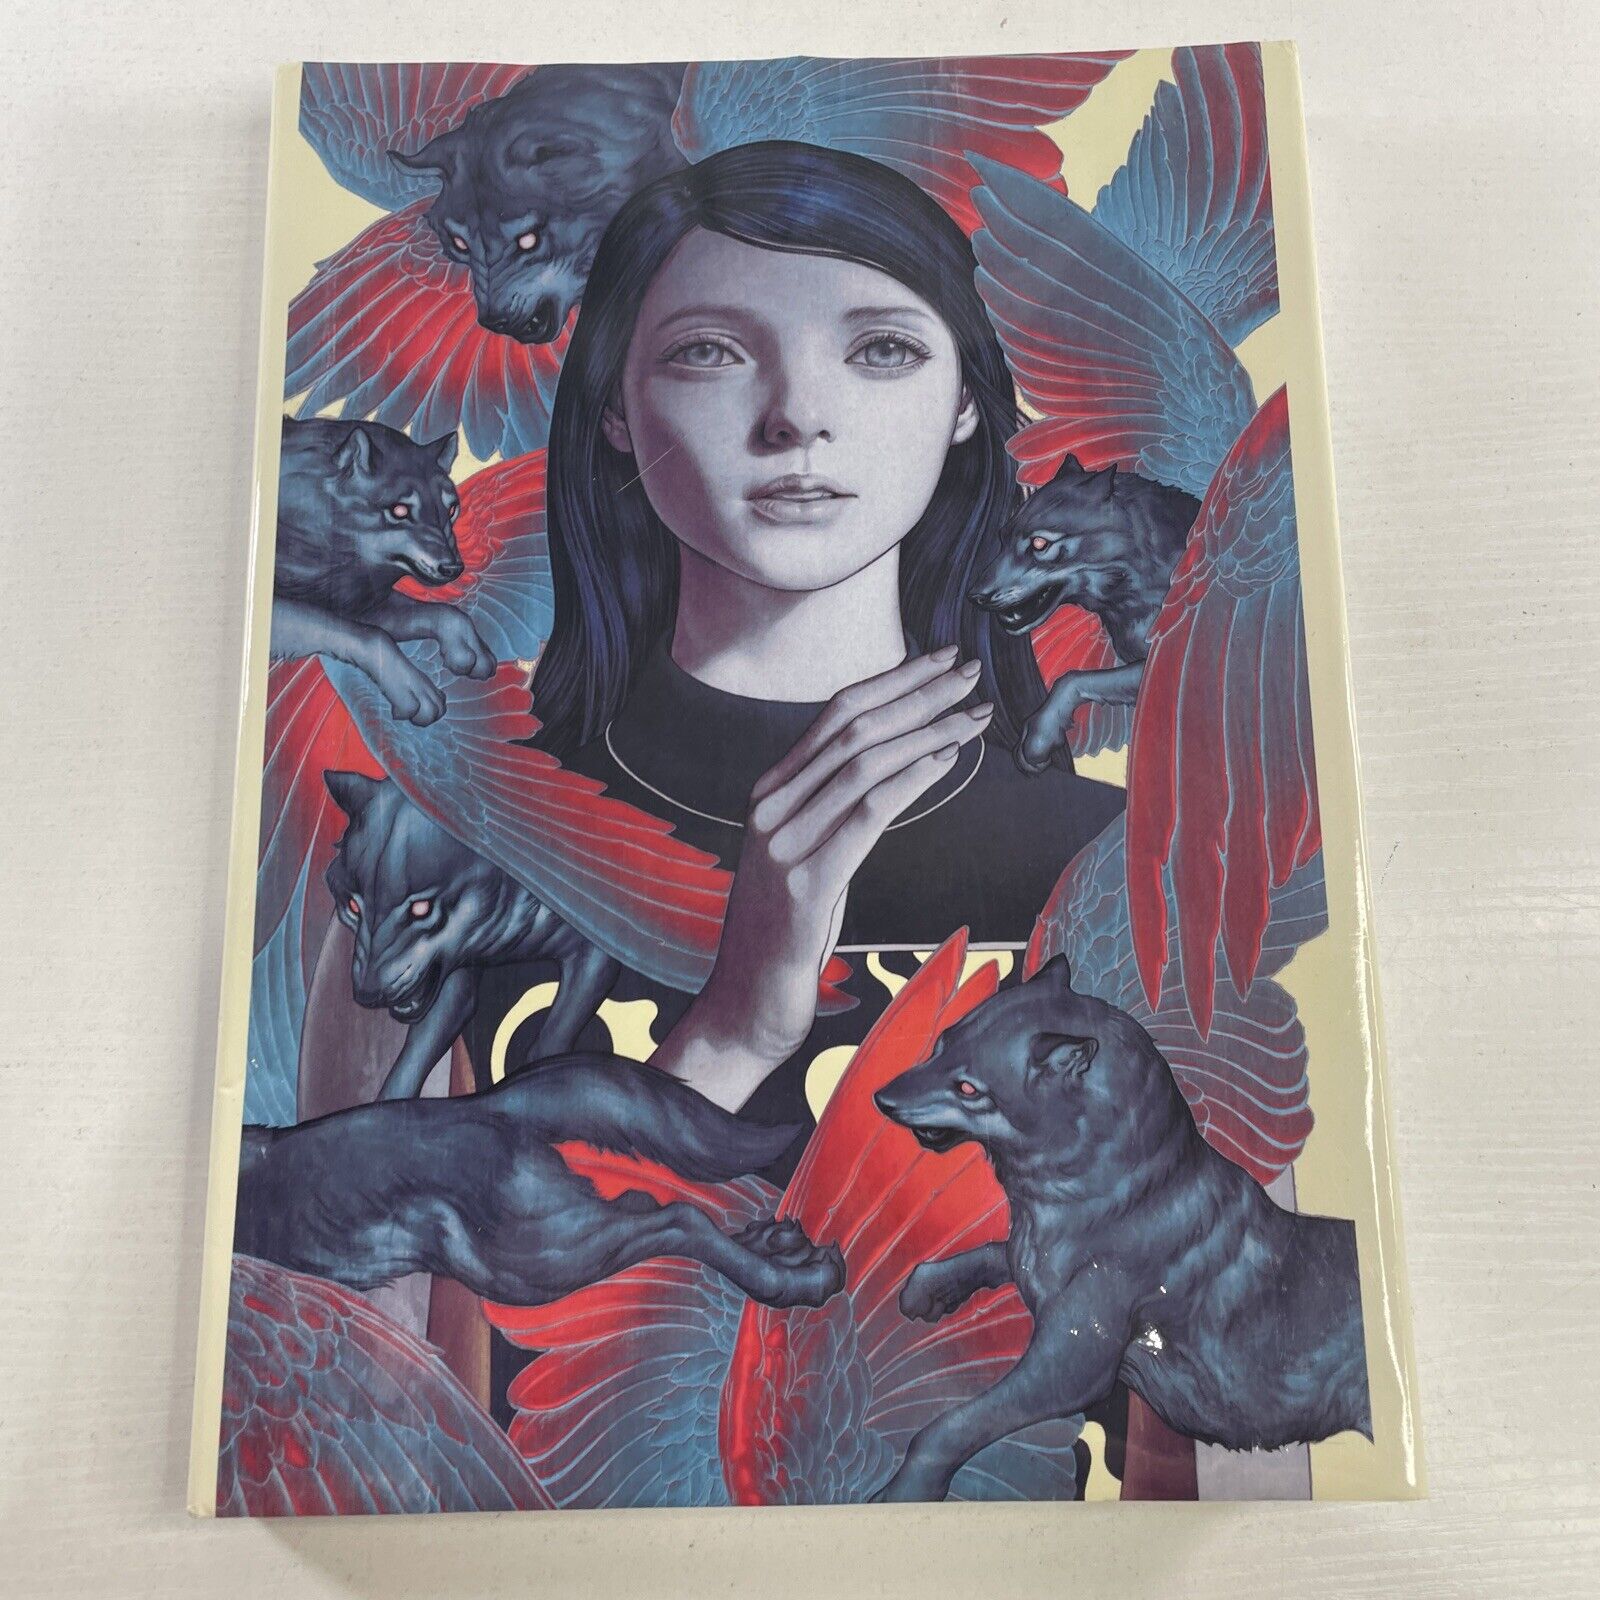 Fables: The Complete Covers by James Jean (DC Comics, 2014)